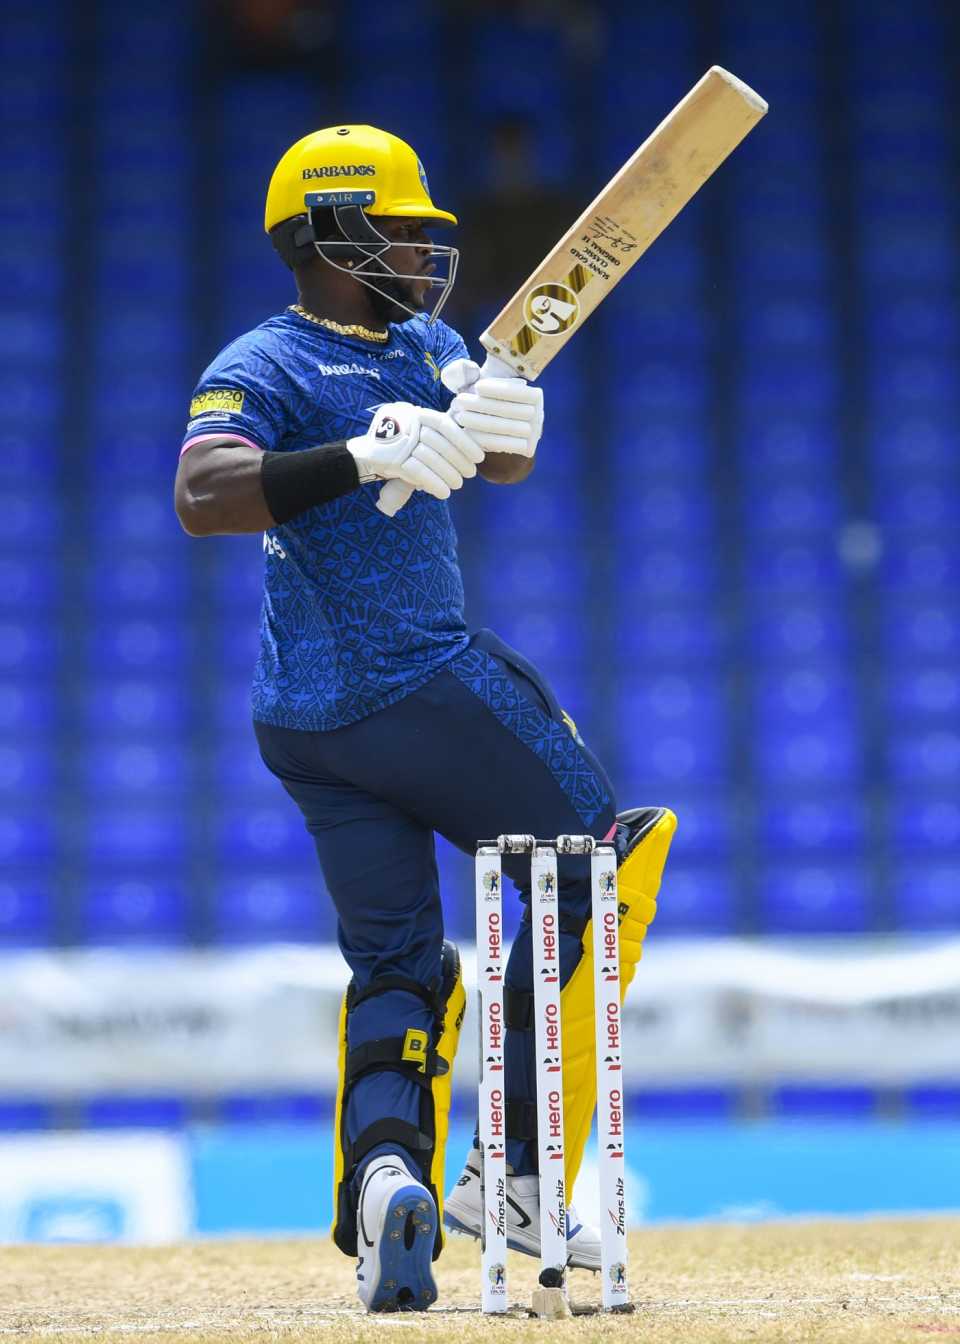 Kyle Mayers goes for the pull shot, Barbados Royals vs St Lucia Kings, Caribbean Premier League, Basseterre, September 12, 2021